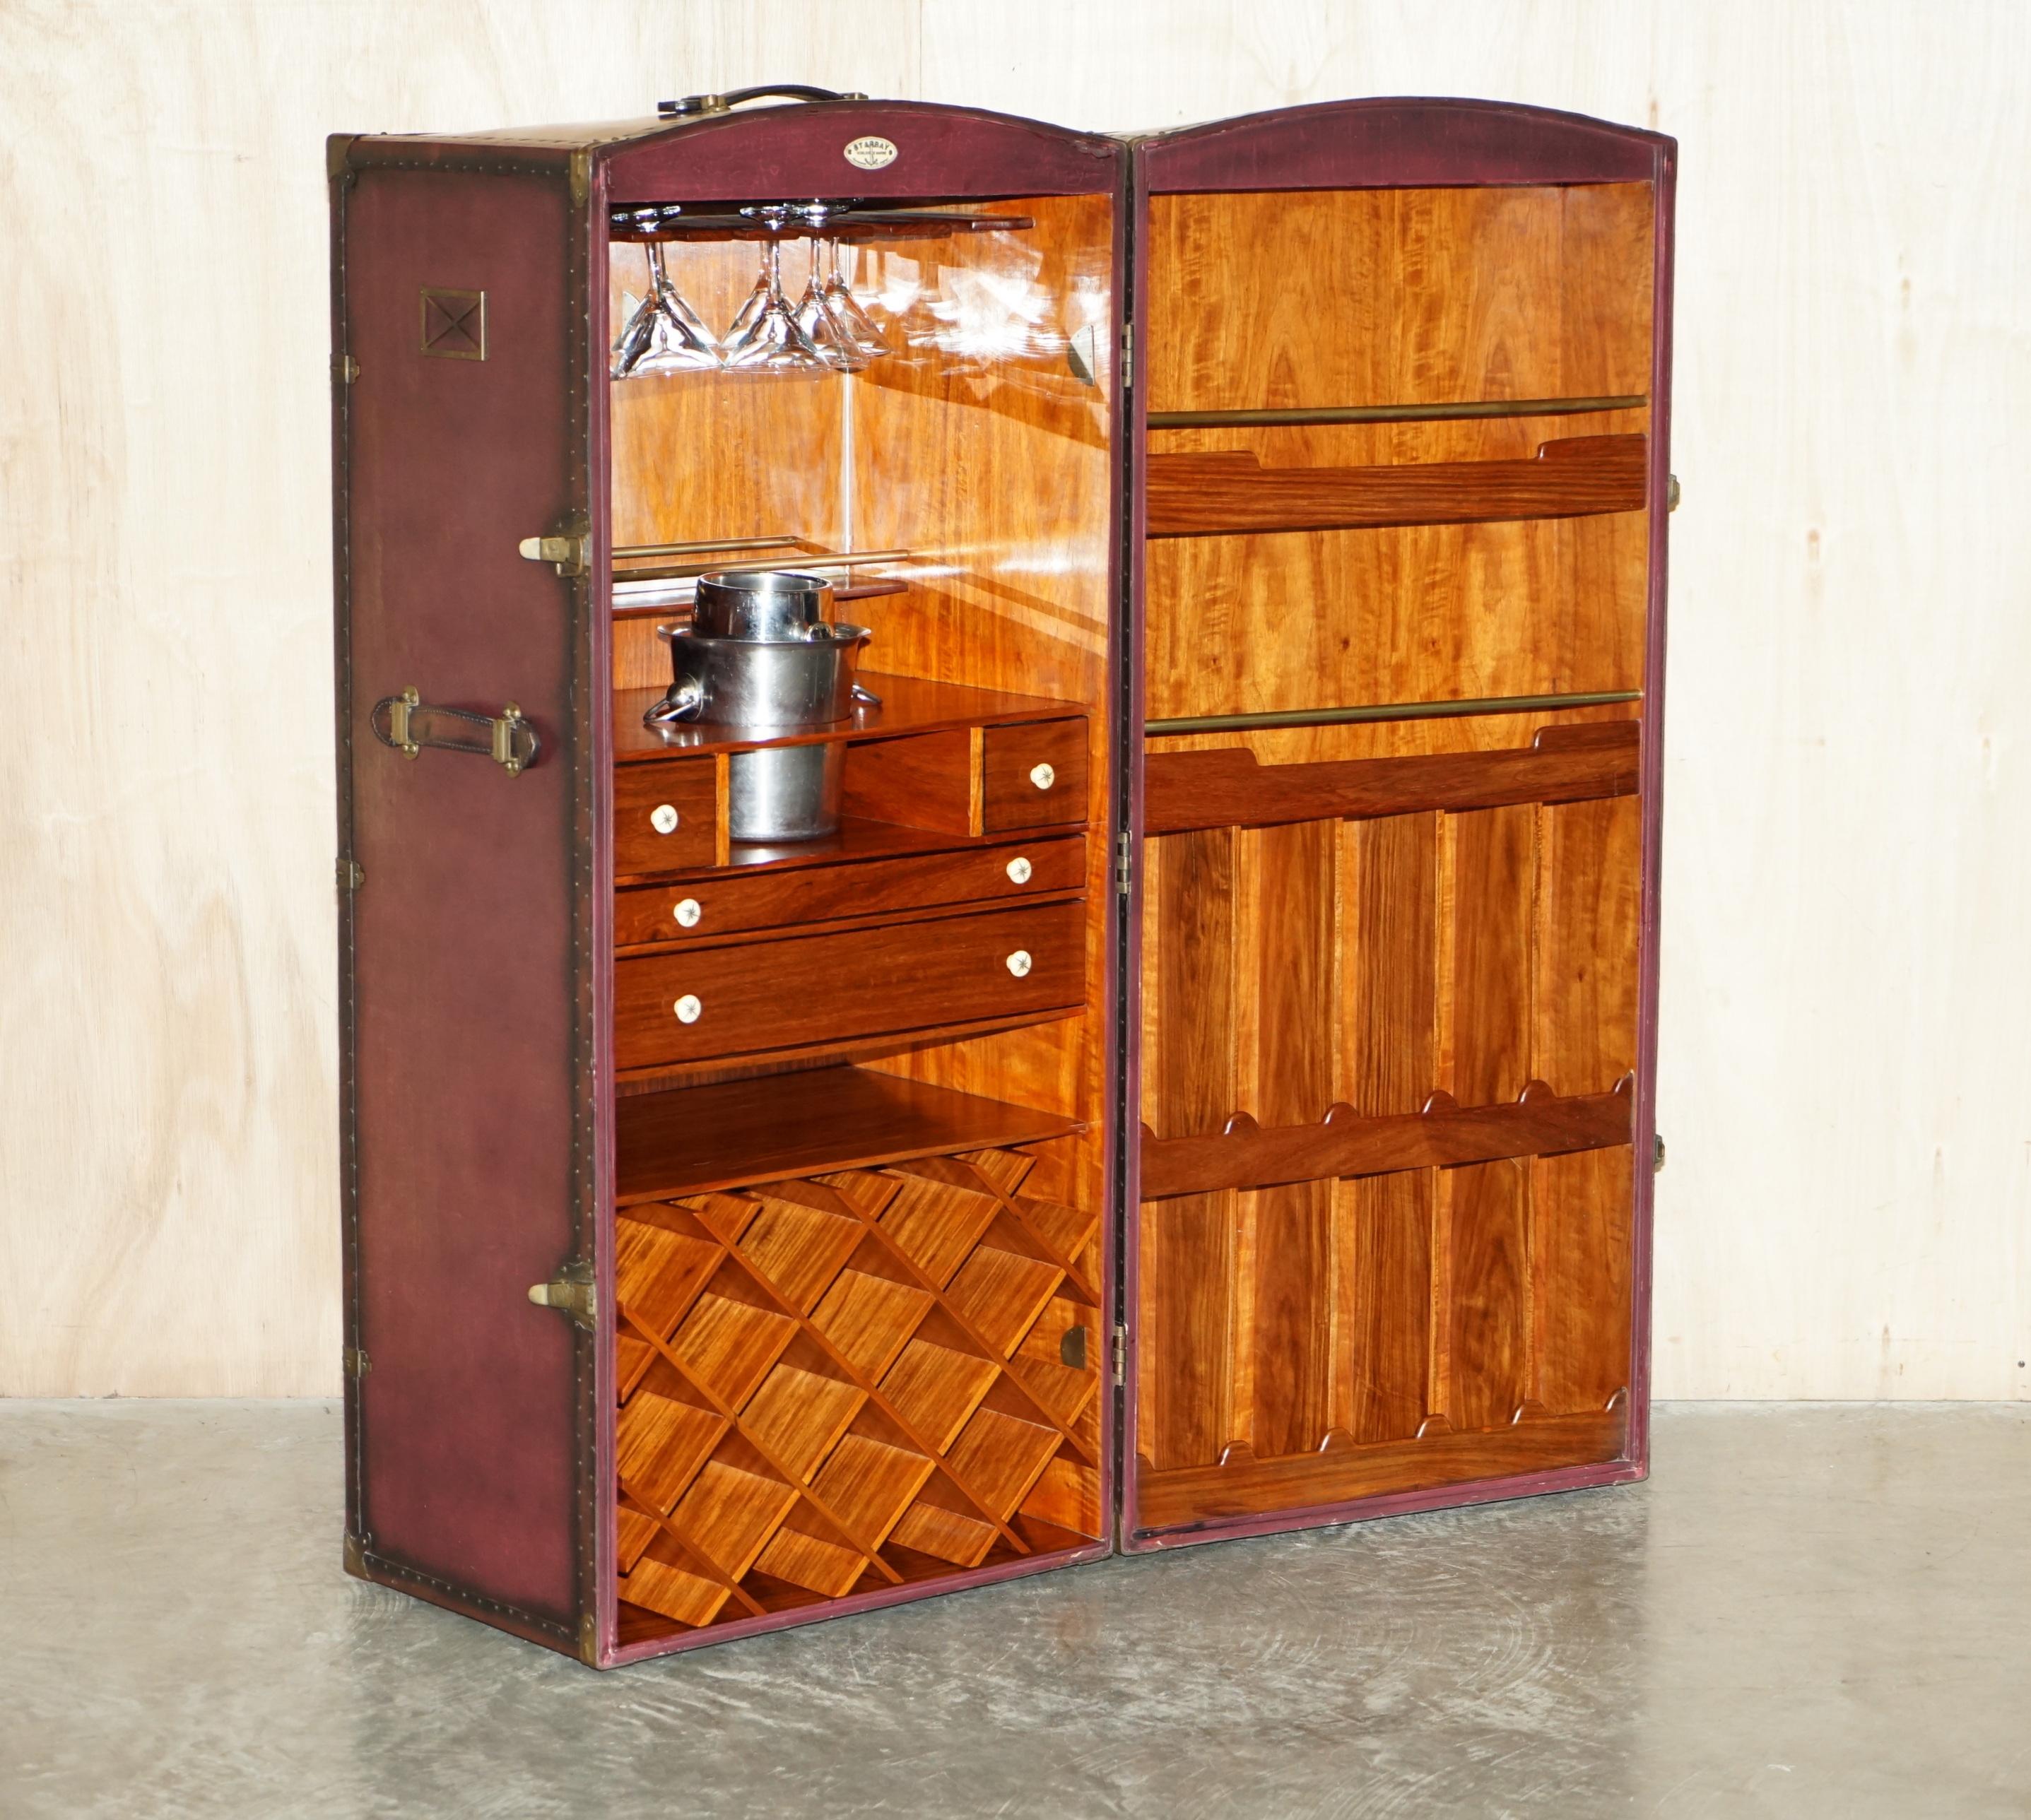 Hand-Crafted STARBAY SURCOUF LARGE STEAMER TRUNK AT HOME BAR WiTH GLASSES CHAMPAGNE BUCKET For Sale